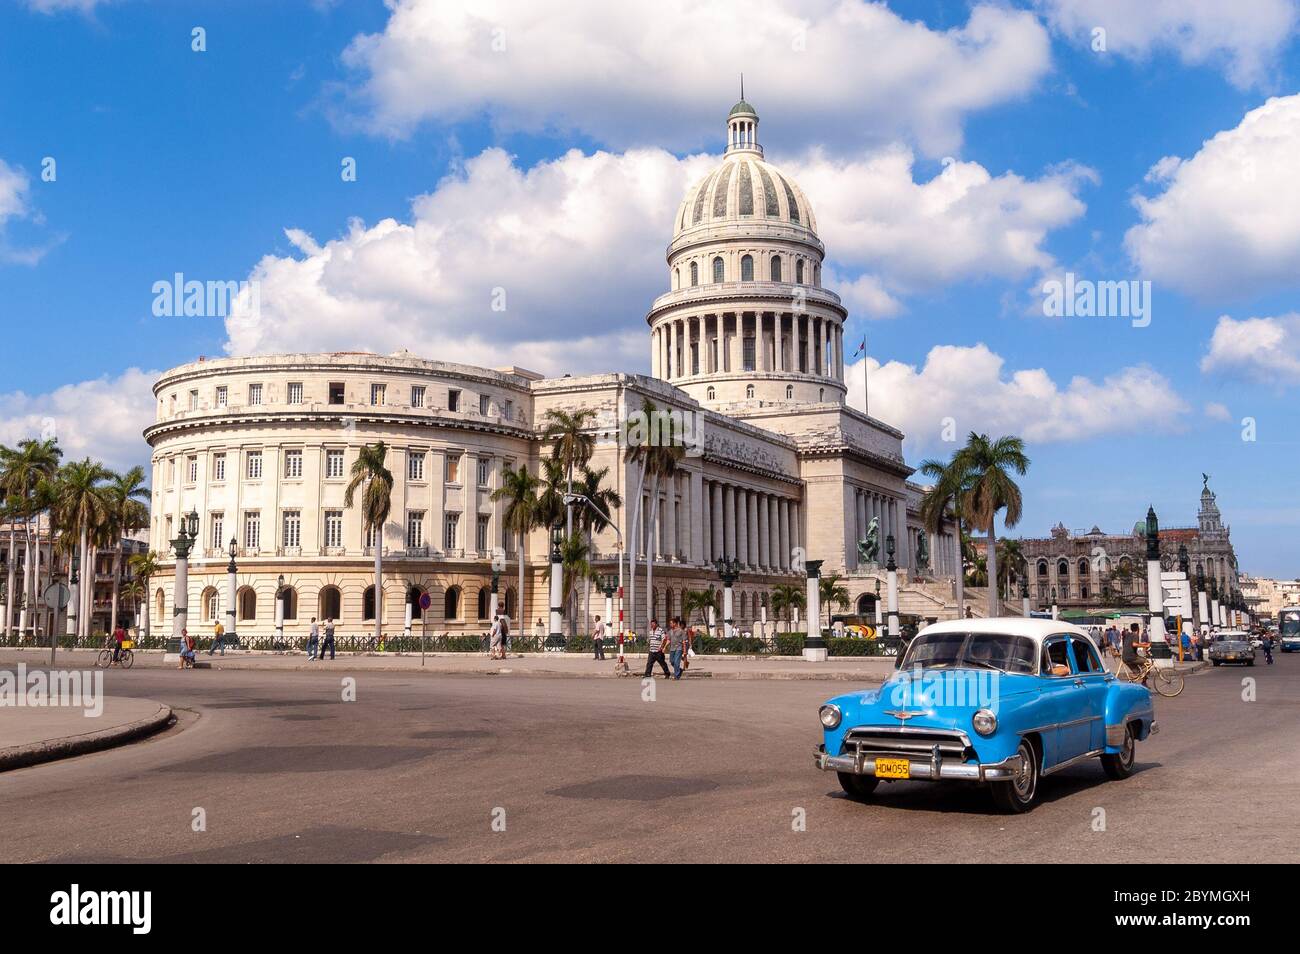 Classic vintage car driving in front of the Capitolio, Havana, Cuba Stock Photo